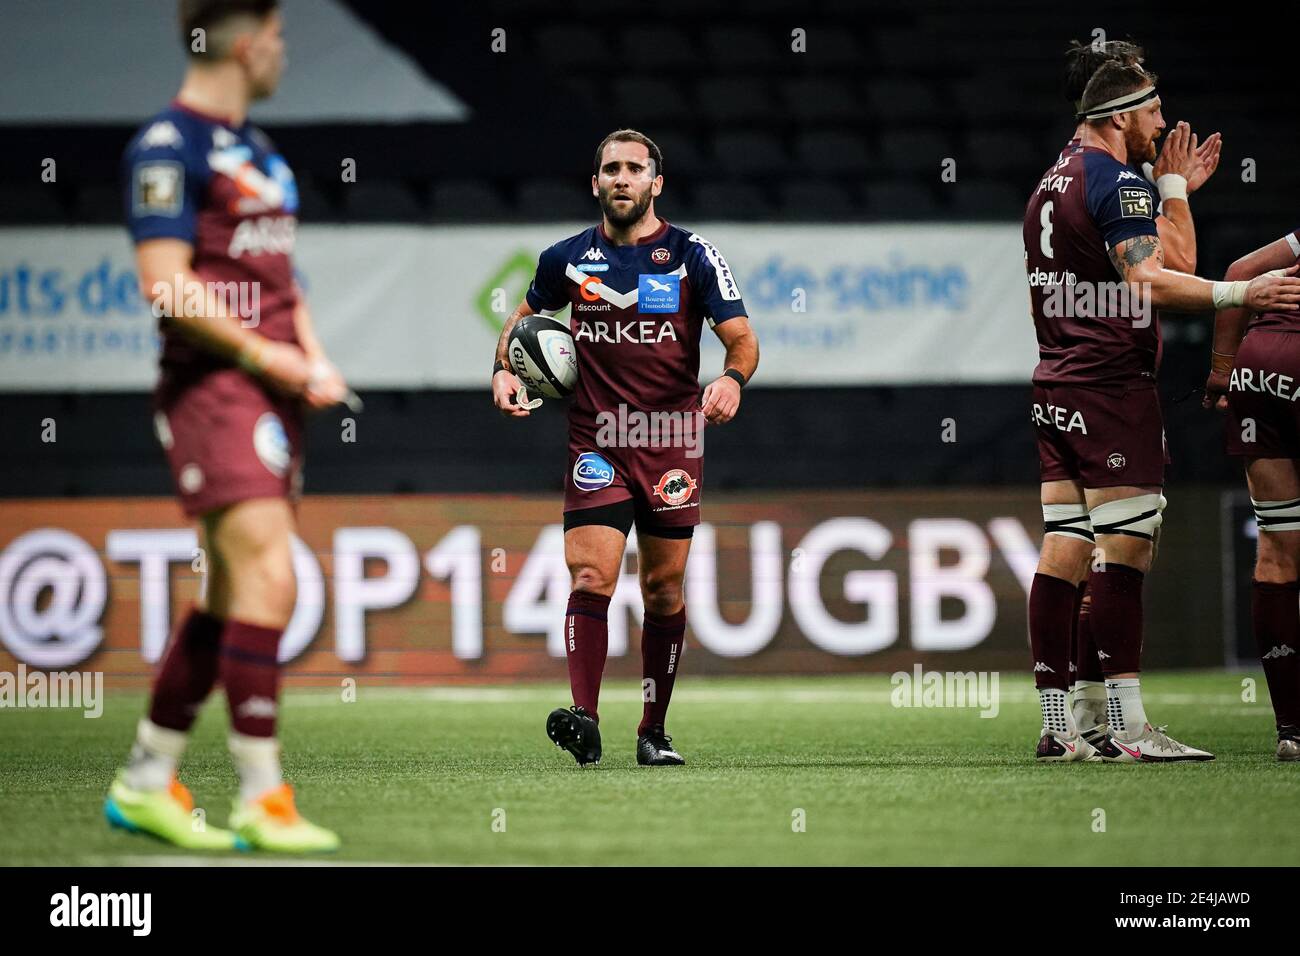 Maxime Lucu (UBB) during the rugby TOP 14 match between Racing 92 (R92) and  Union Bordeaux Begles (UBB) at the Paris La Defense Arena, in Nanterre,  France on January 23, 2021. Photo